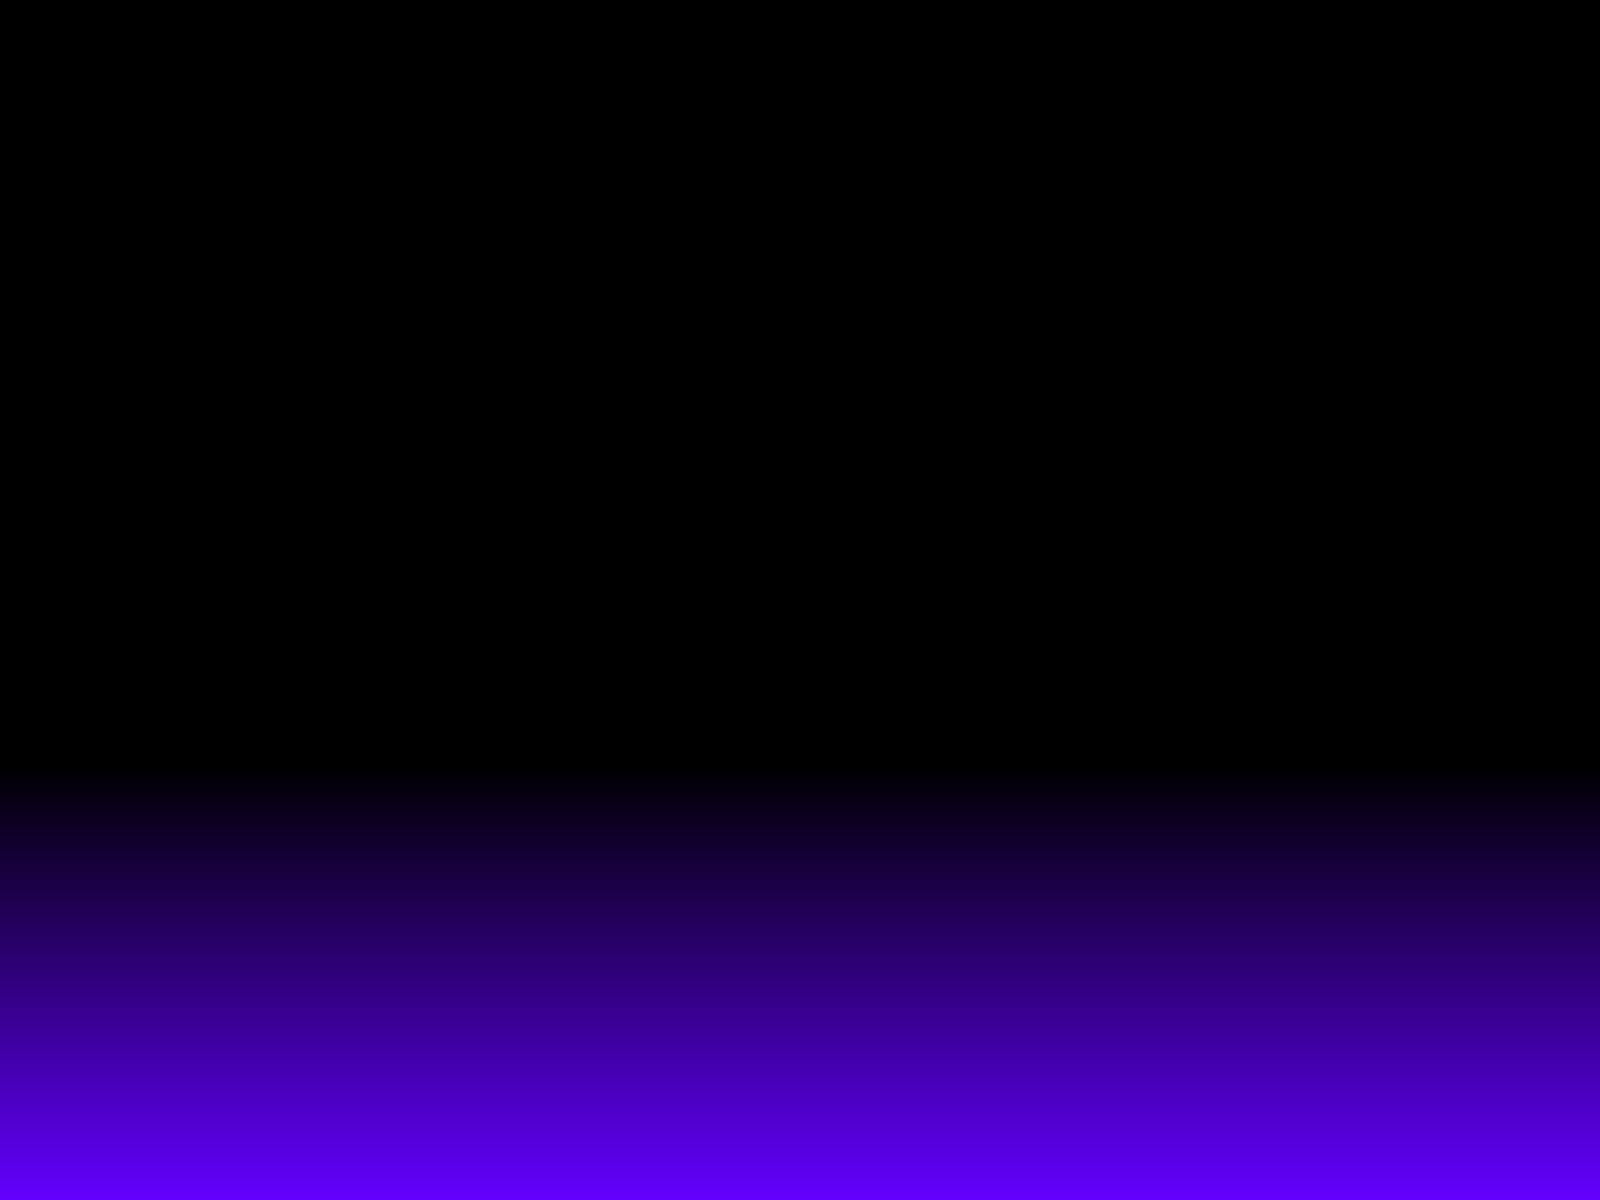 Black and Purple Gradient Background by TheRPRTNetwork on DeviantArt